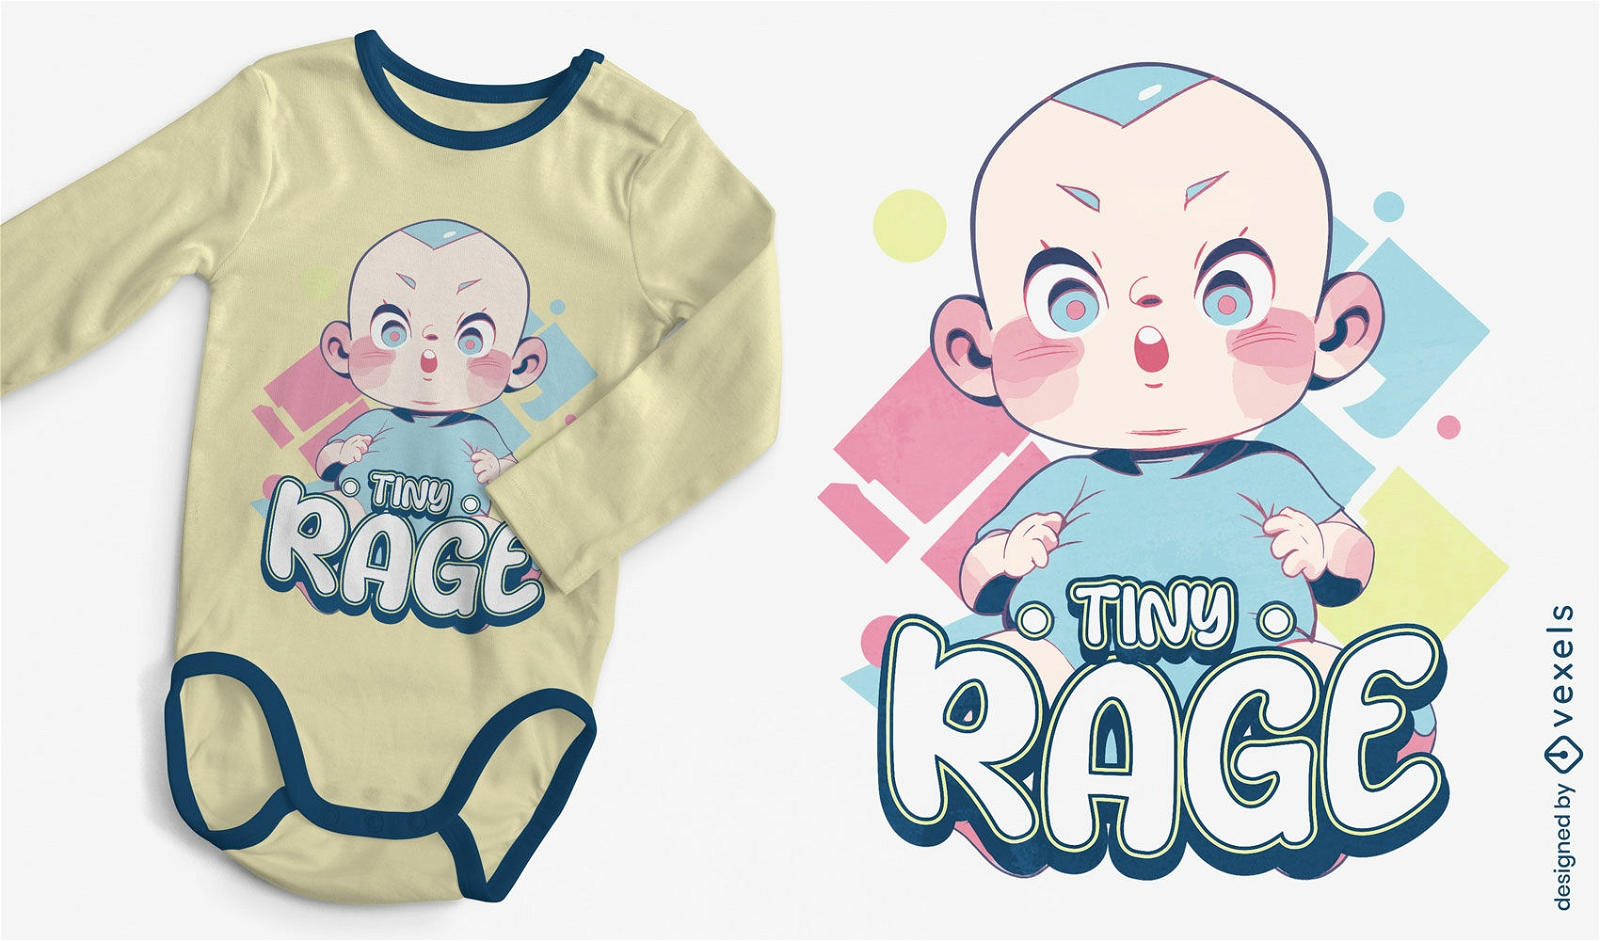 Cute angry baby t-shirt design